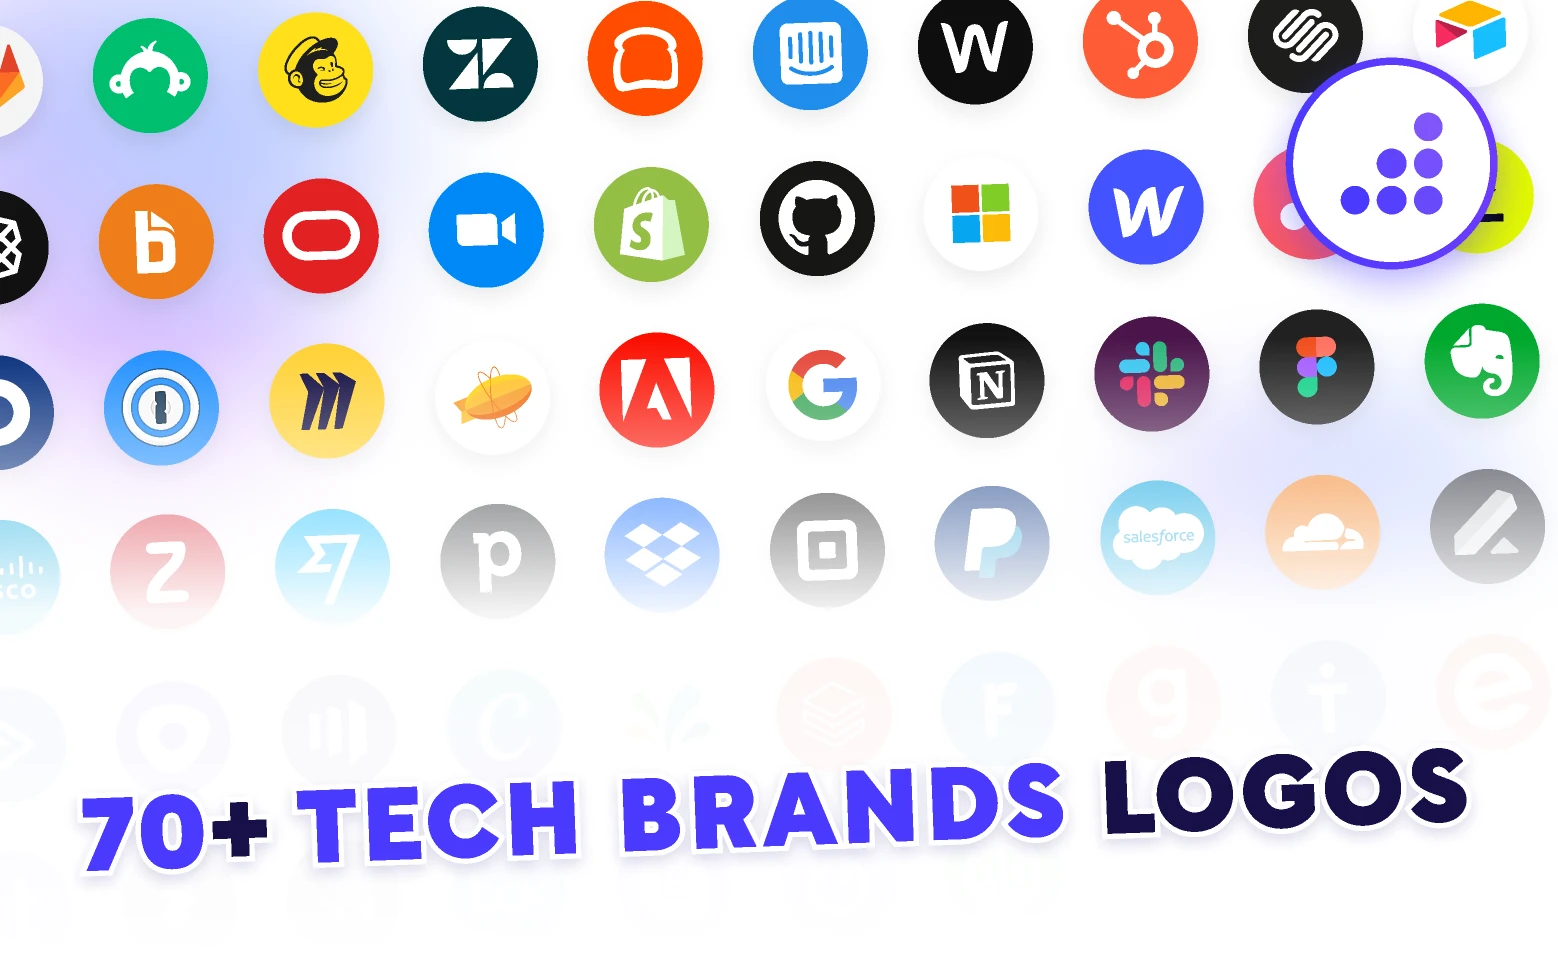 70+ Tech Brands Logos | BRIX Templates for Figma and Adobe XD